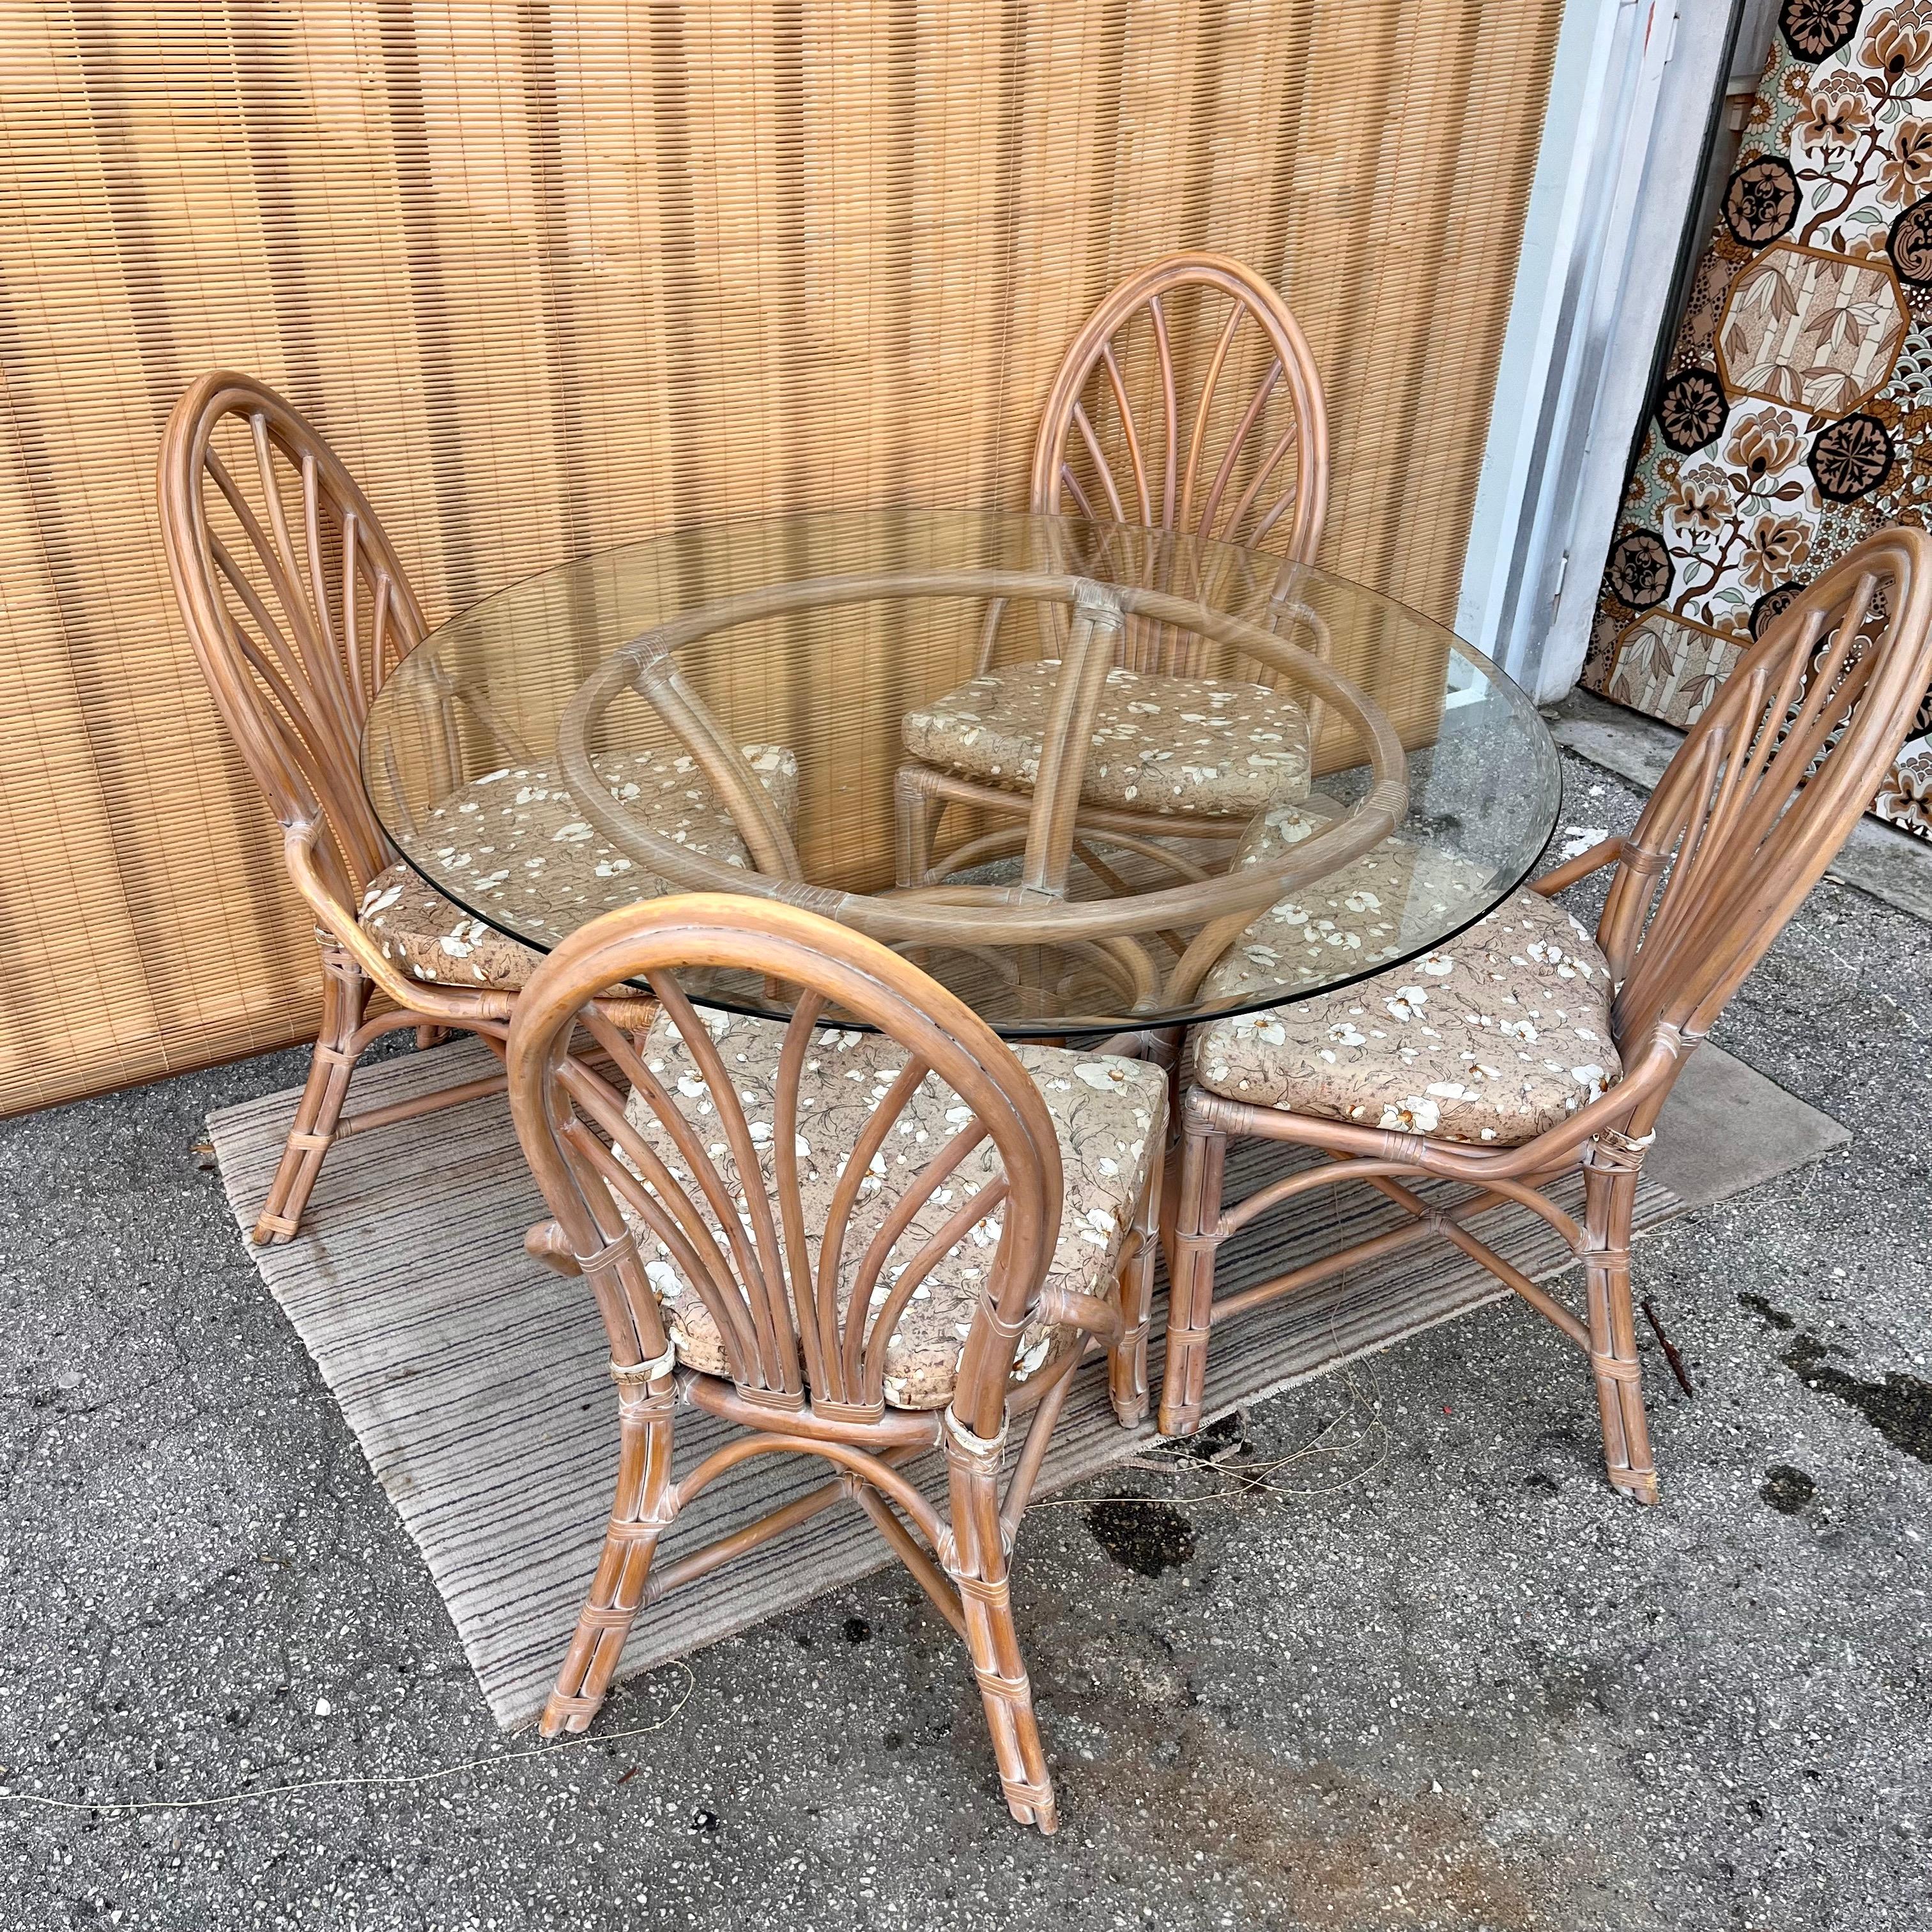 Vintage 5 Pieces Coastal Style Rattan dining set in the McGuire's Manner. Circa 1980s 
Features an intricate bent rattan fretwork in an antique washed white finish bounded by laced rawhide to complement the design. The chairs come with removable